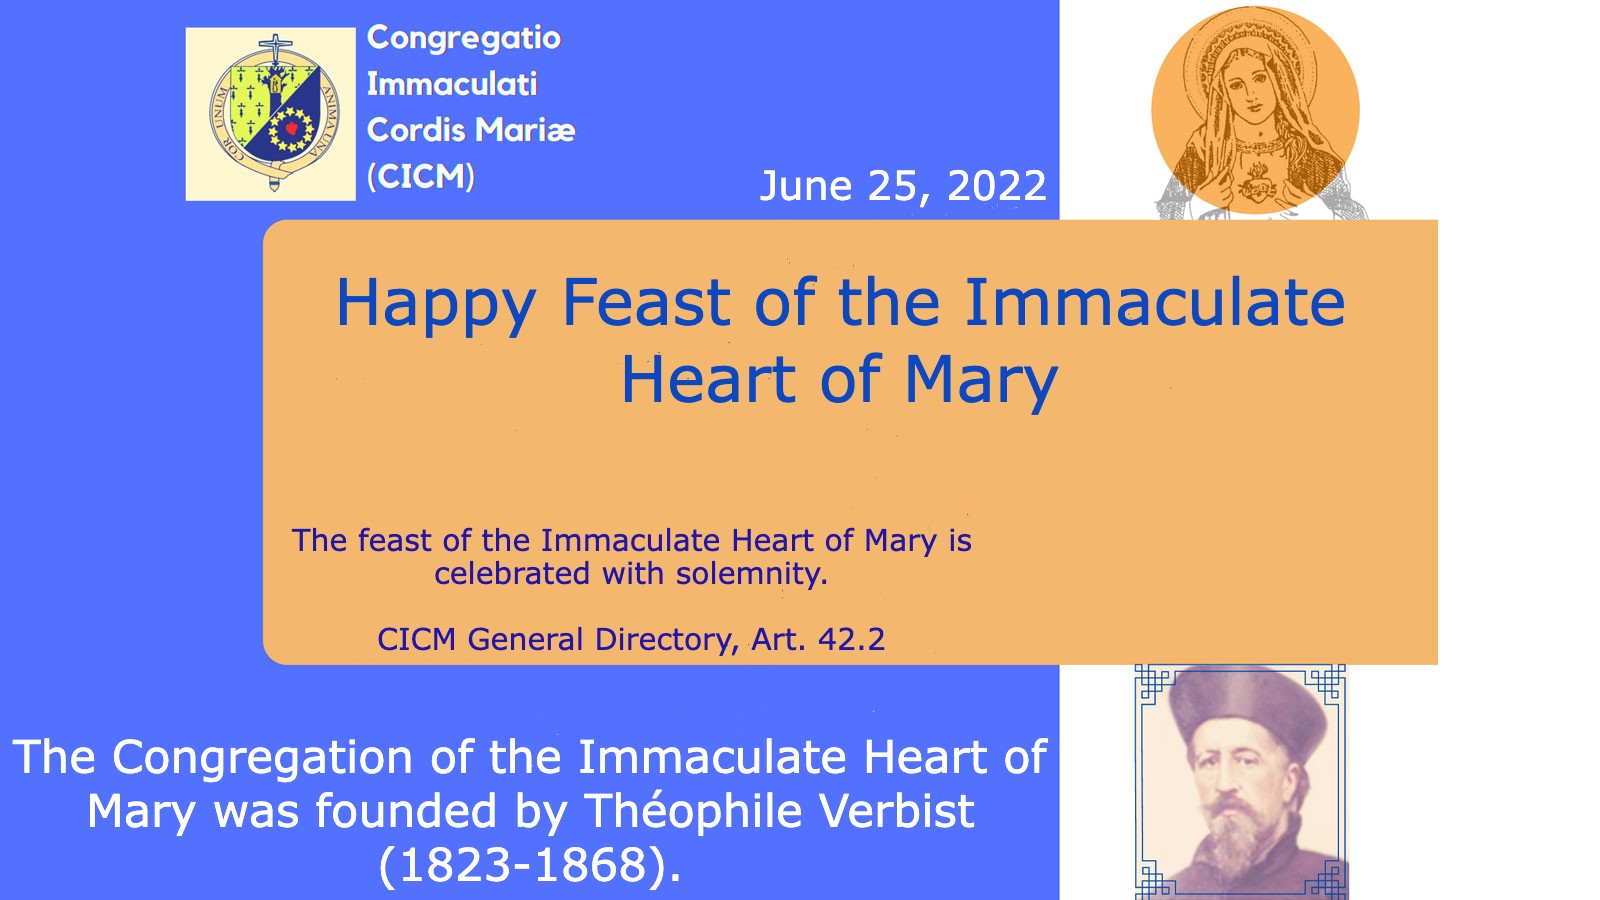 Feast of the Immaculate Heart of Mary - June 25, 2022